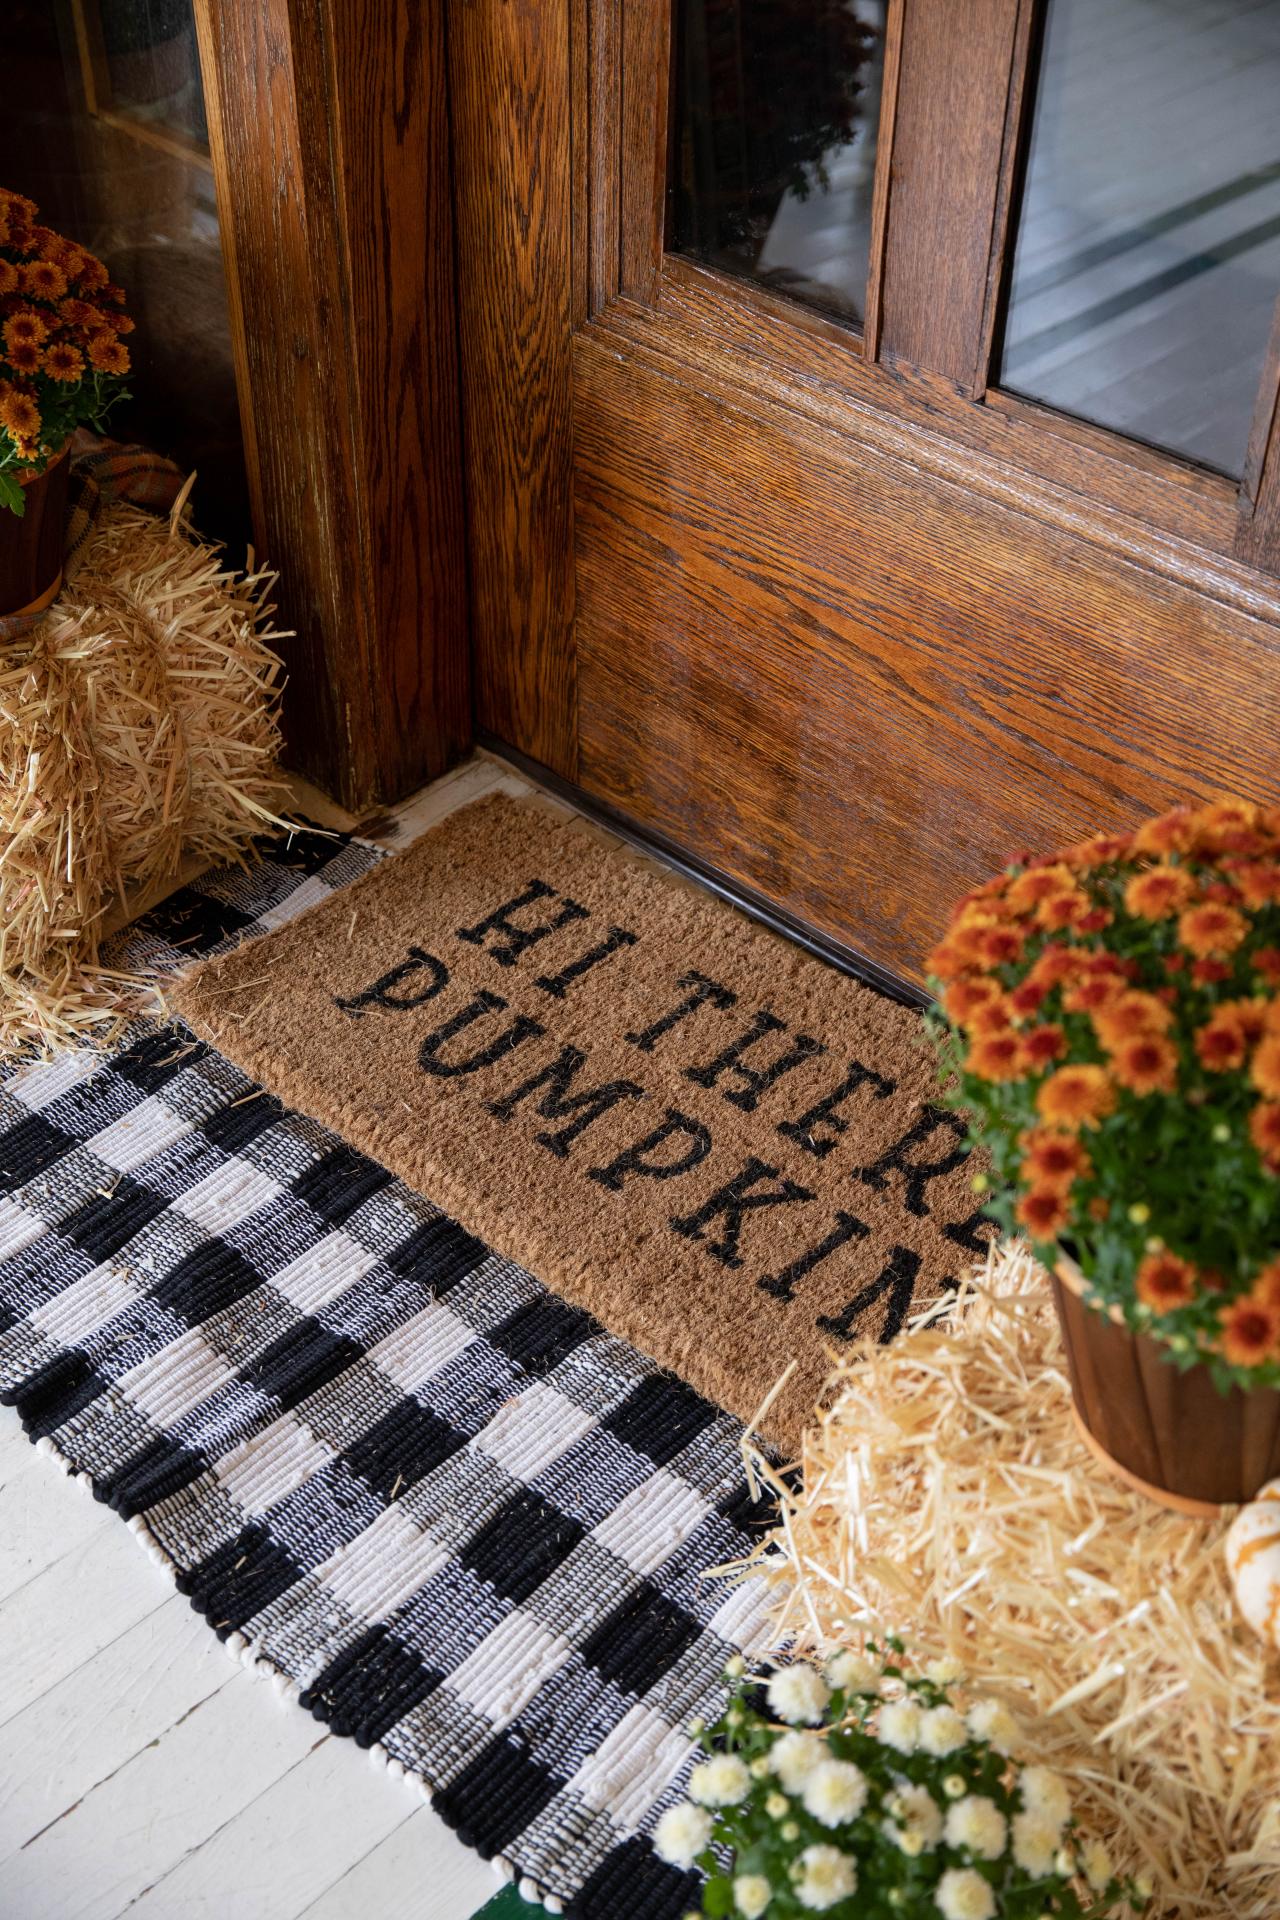 fall doormat with plaid underlay. Fall decor ideas for your porch.